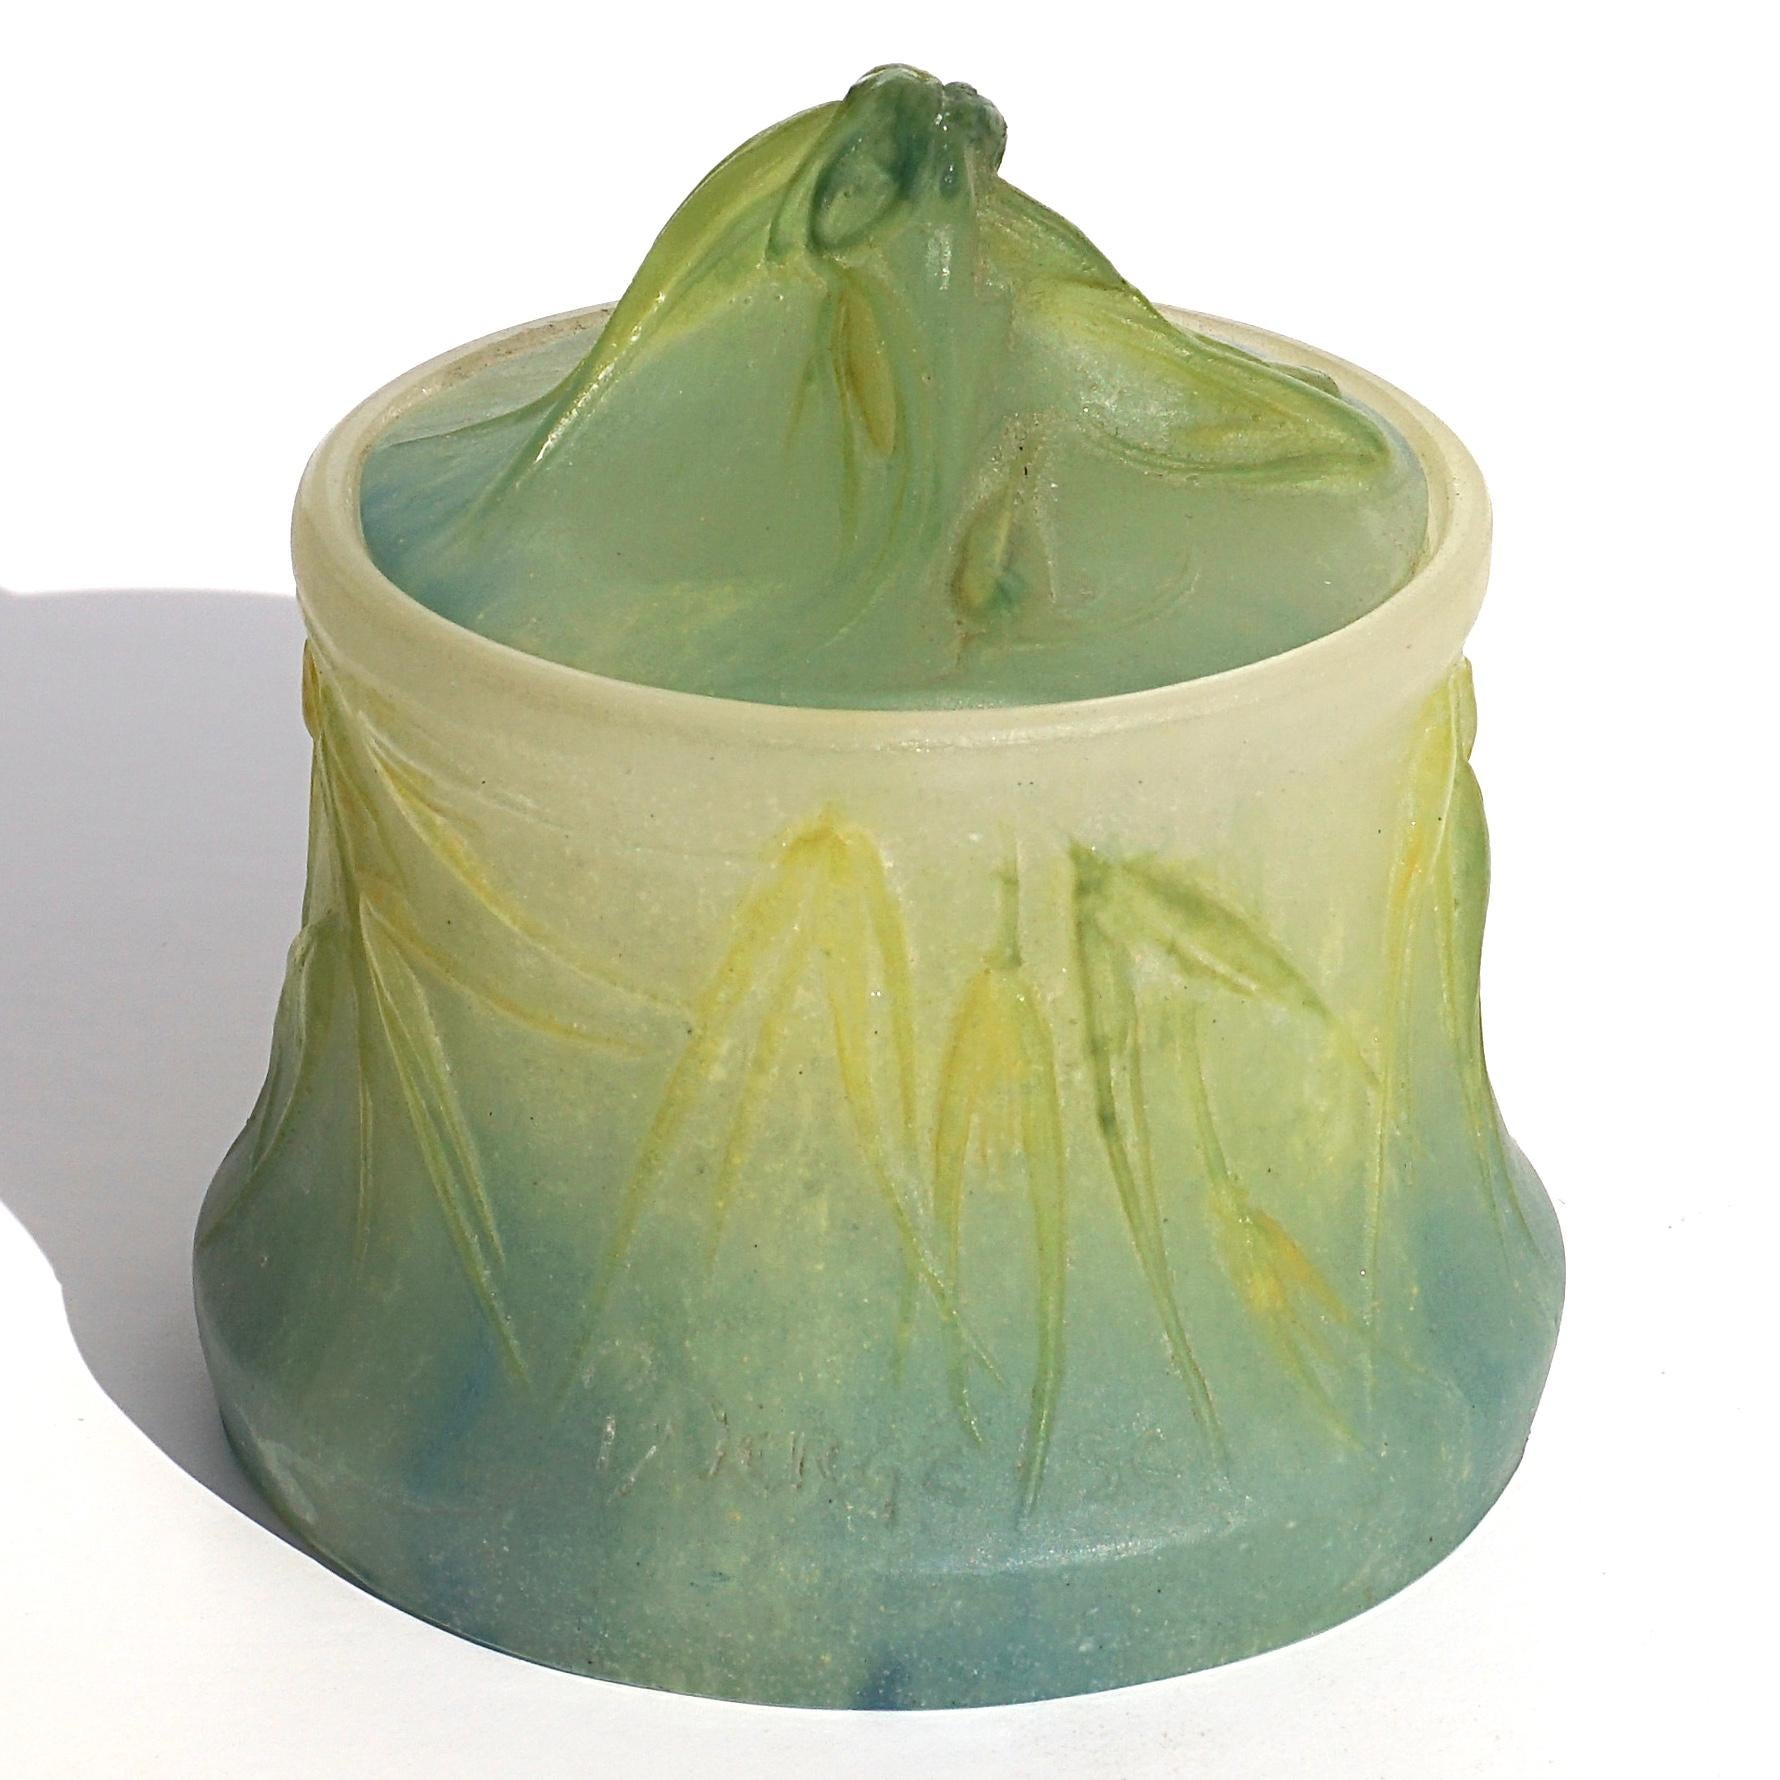 Amalric Walterand Henri Berge Pate De Verre Lidded Art Nouveau vase.

A gorgeous pâte-de-verre floral box or jar with lid by Almeric Walter. The 3.7 inch tall pâte-de-verre box has a background of frosted yellowish white, blue and green glass,